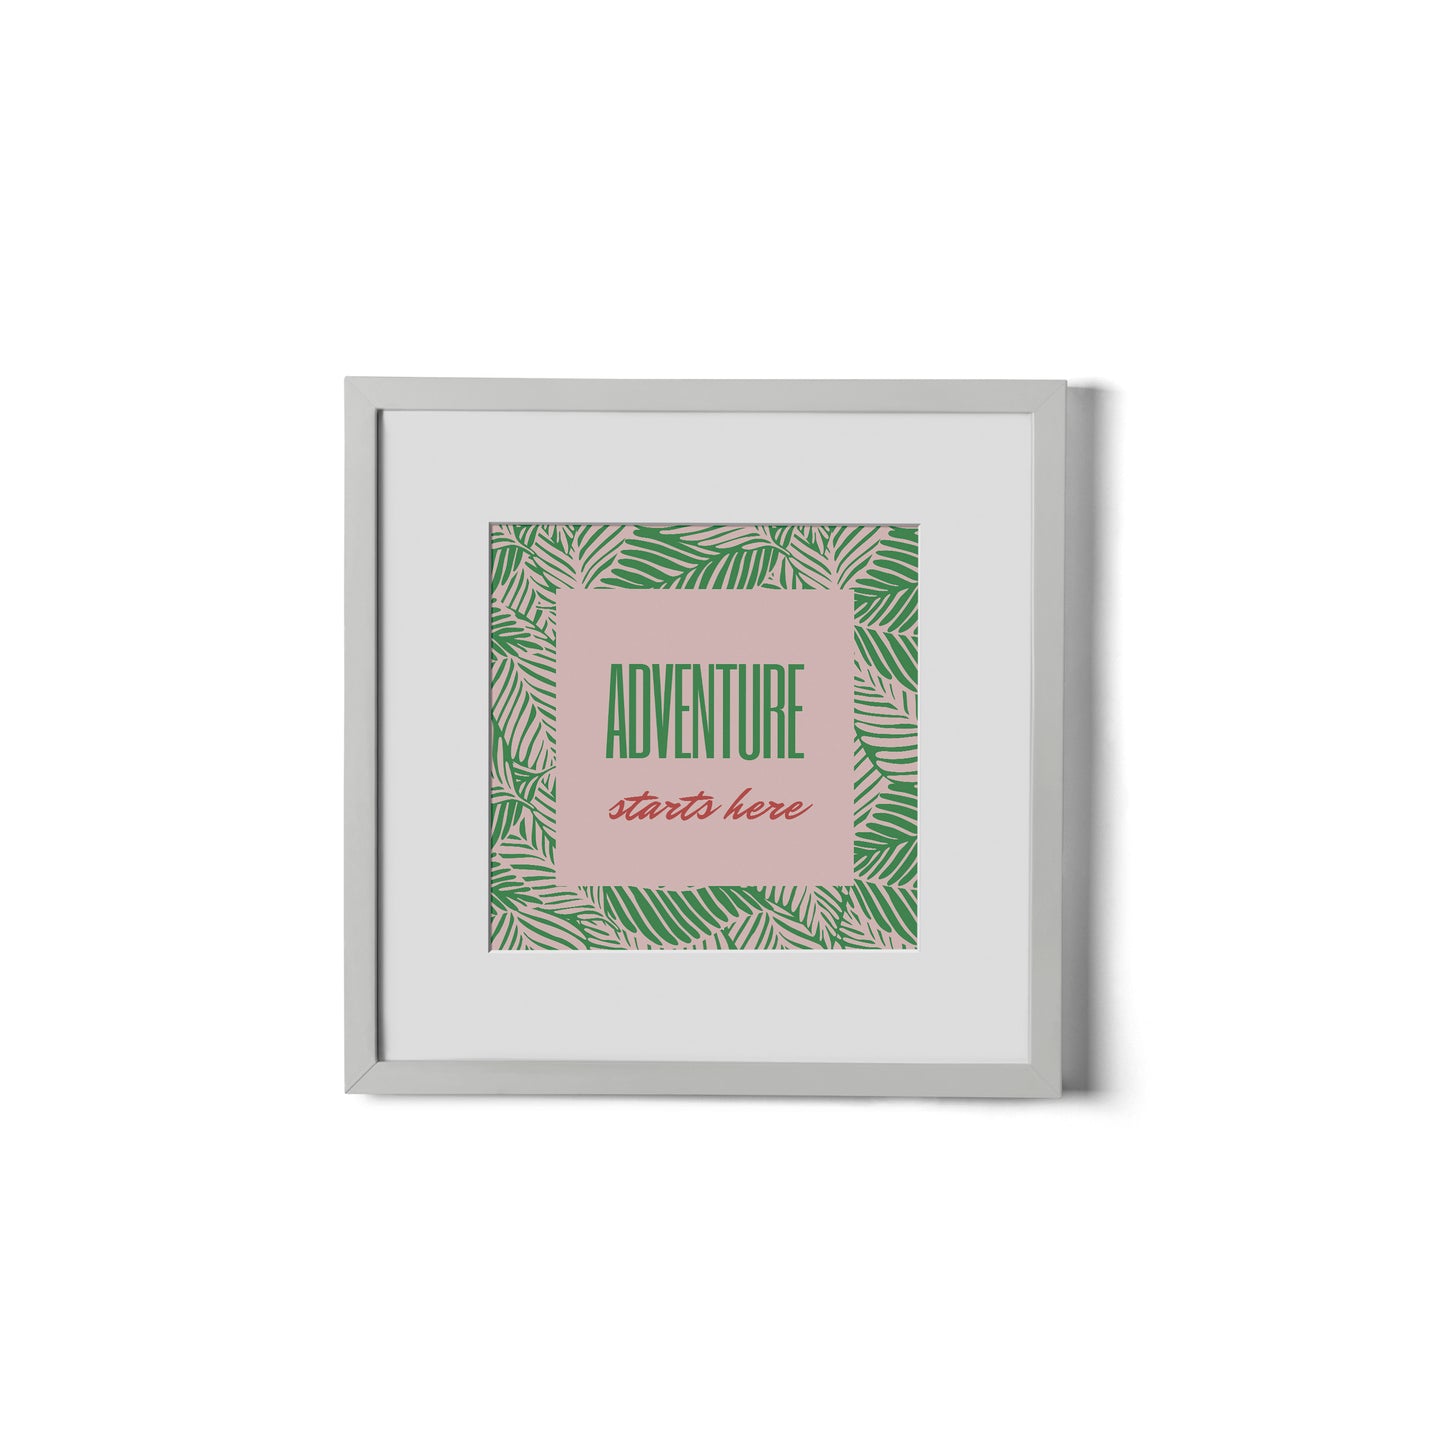 Adventure Starts Here - Vintage Miami Art Deco Inspired Wall Art - Square